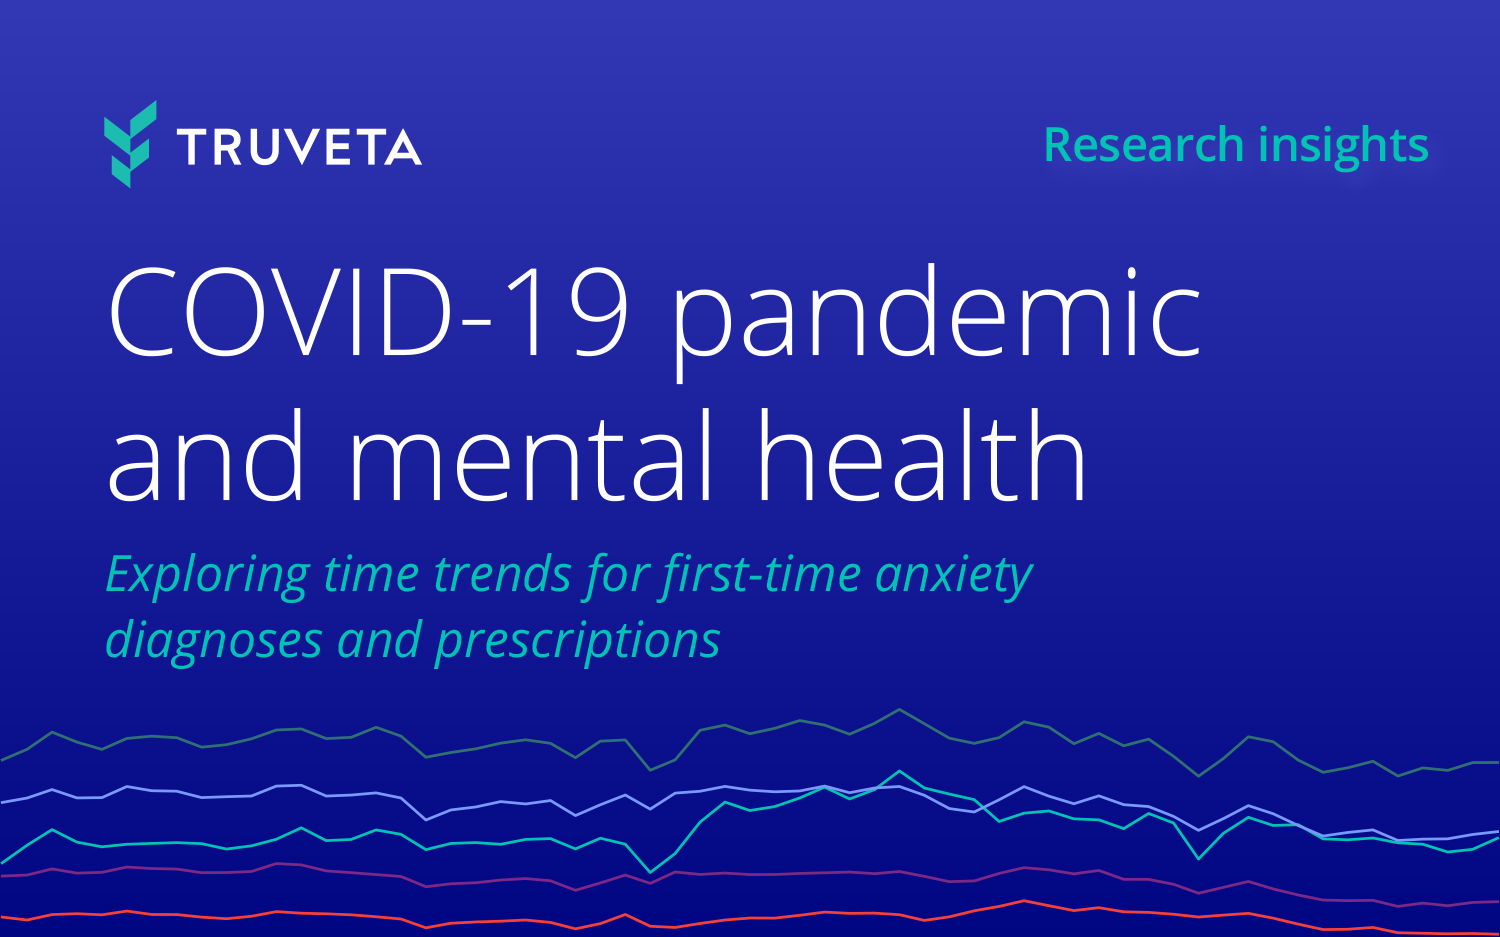 Using EHR data, • Truveta Research explored whether the rates of first-time anxiety diagnoses or first-time anxiety-related prescriptions were higher during the COVID-19 pandemic compared to the pre-pandemic era.